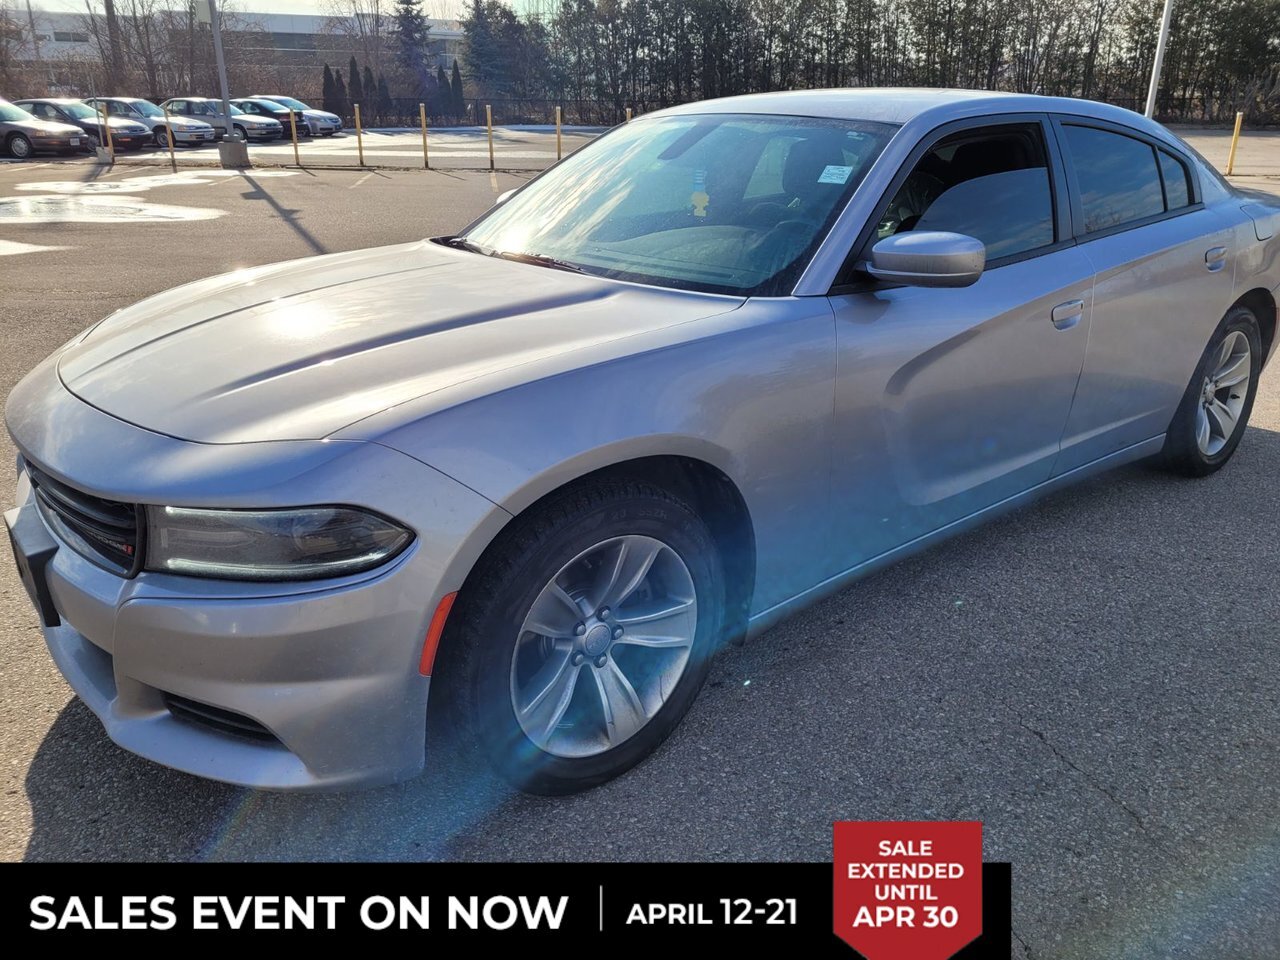 2015 Dodge Charger SXT Rwd 2 Sets Rims/Tires | Remote Start | Heated 